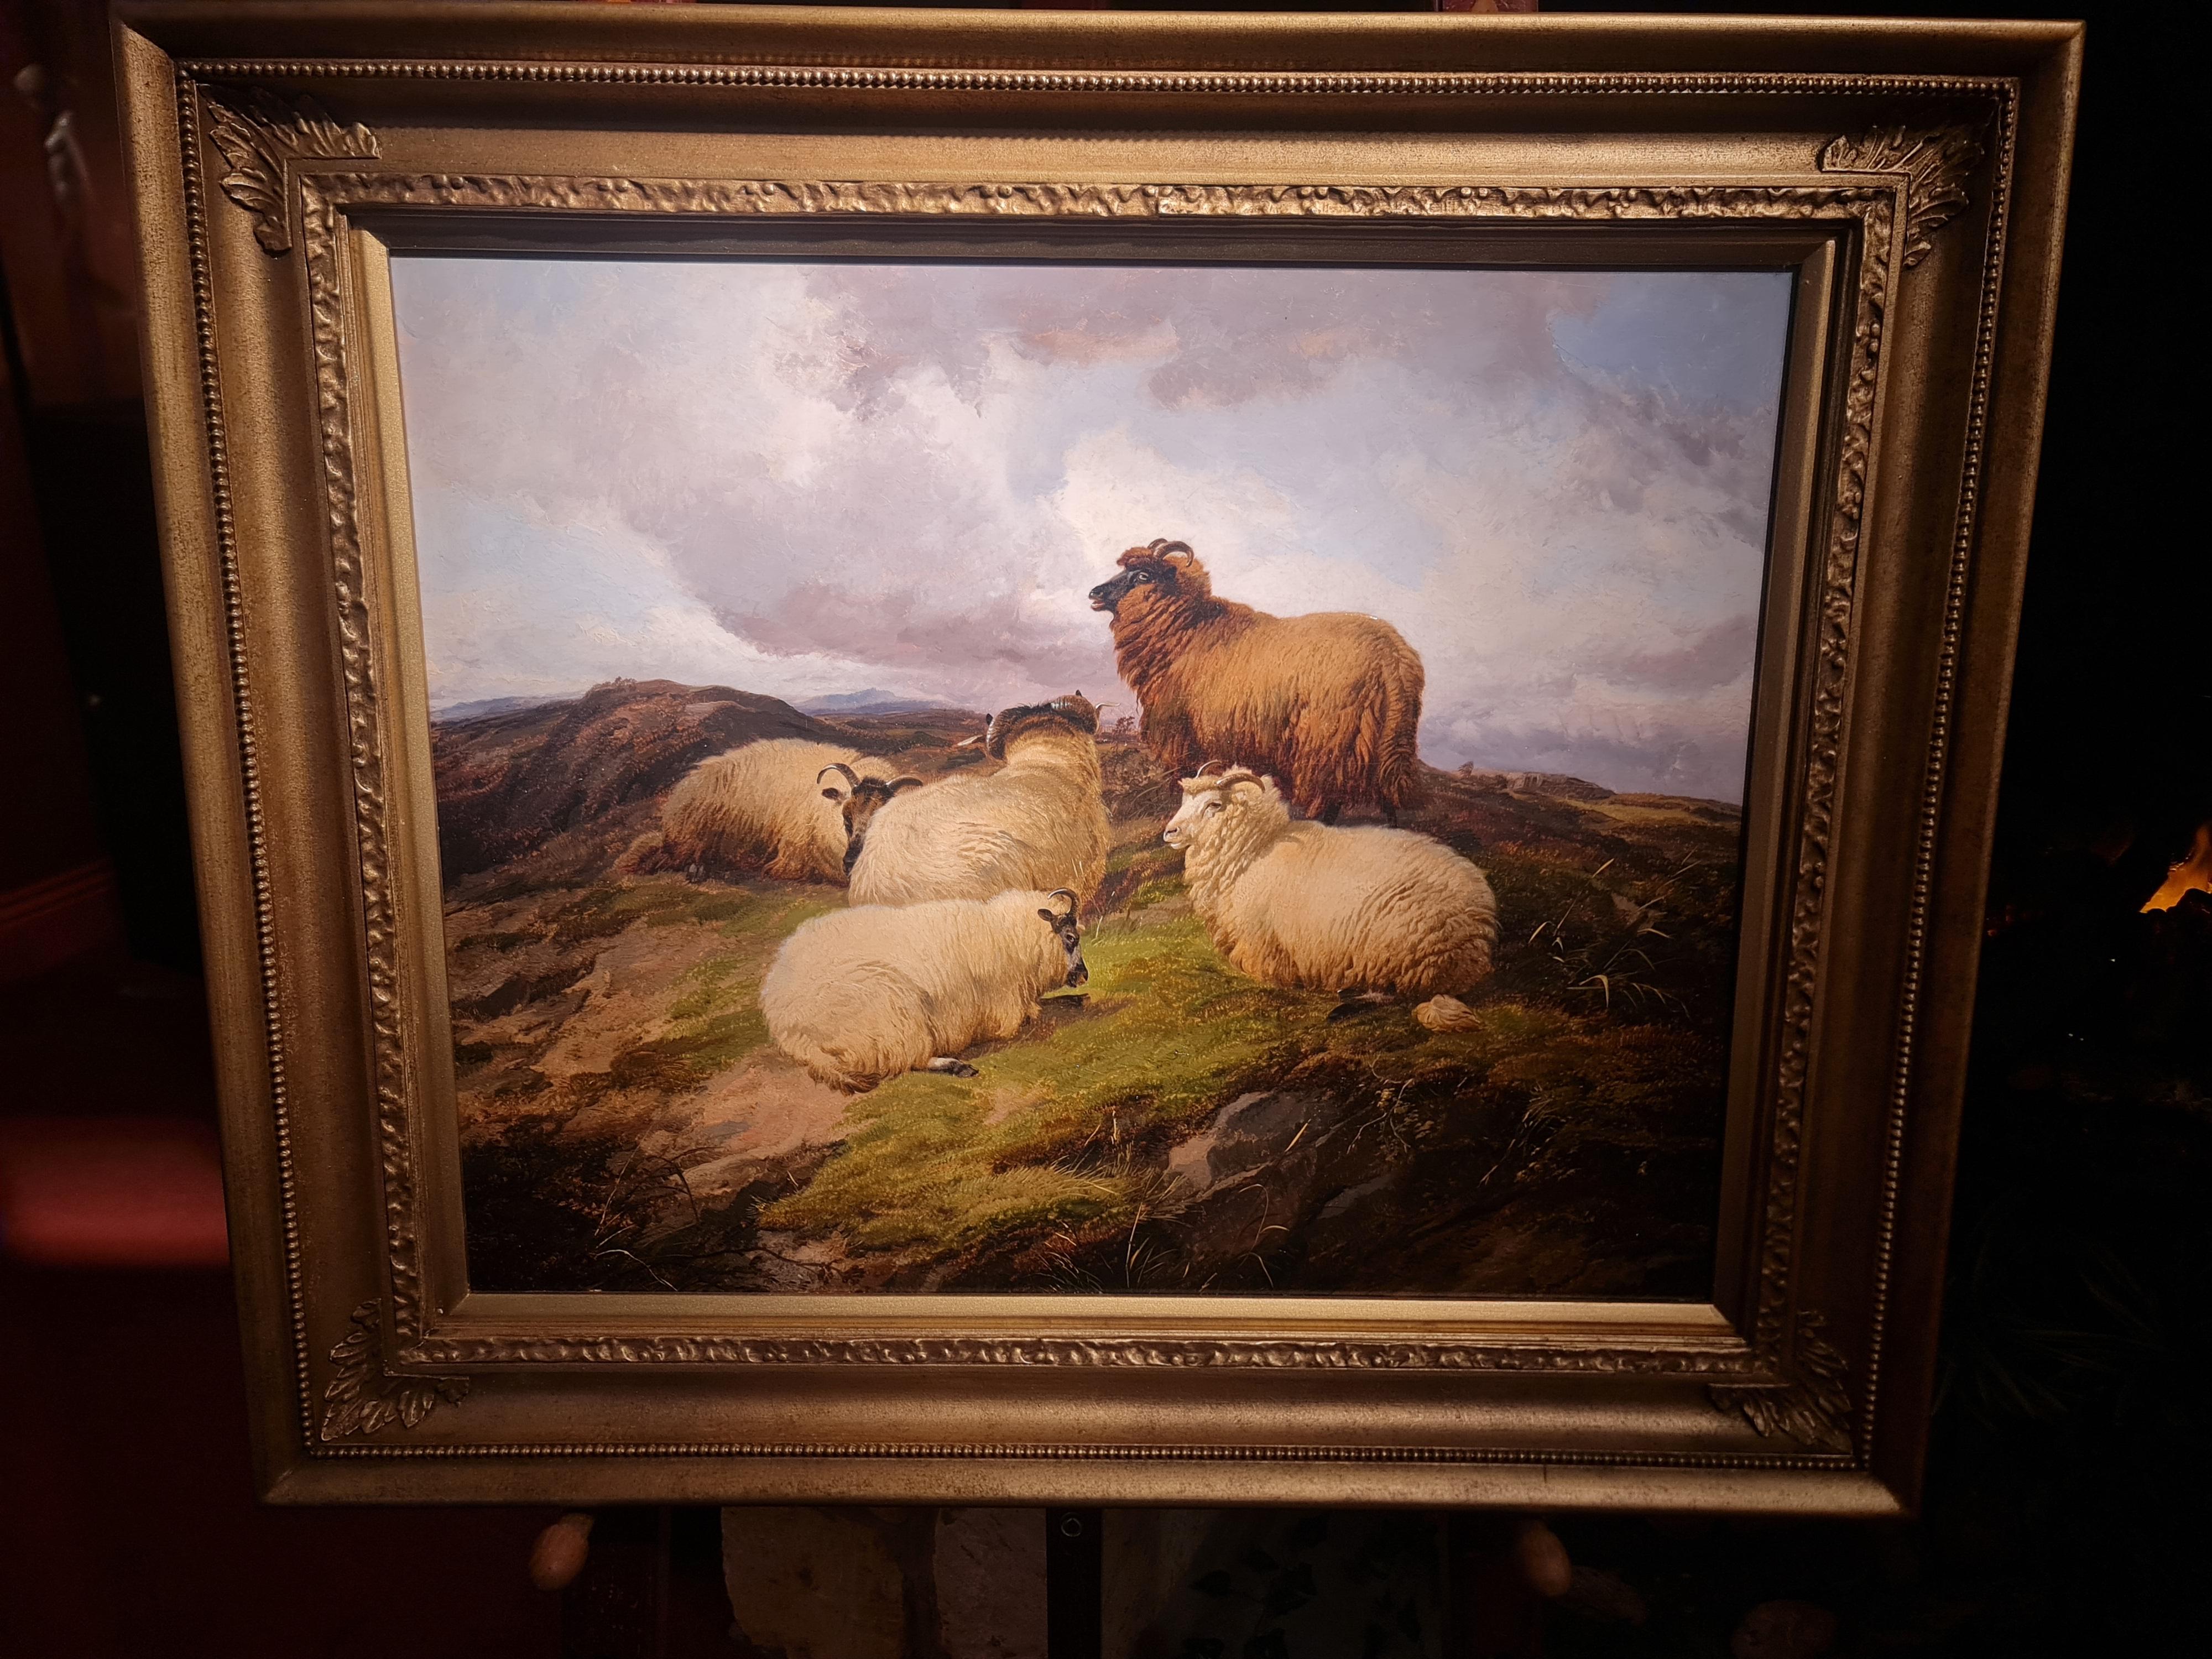 Highland Pastures
by Thomas Sidney Cooper RA
British, 1803-1902

Oil on panel
Panel size: 16.5 x 21 inches
Framed size: 23 x 27 inches

Signed and dated 1851 lower right